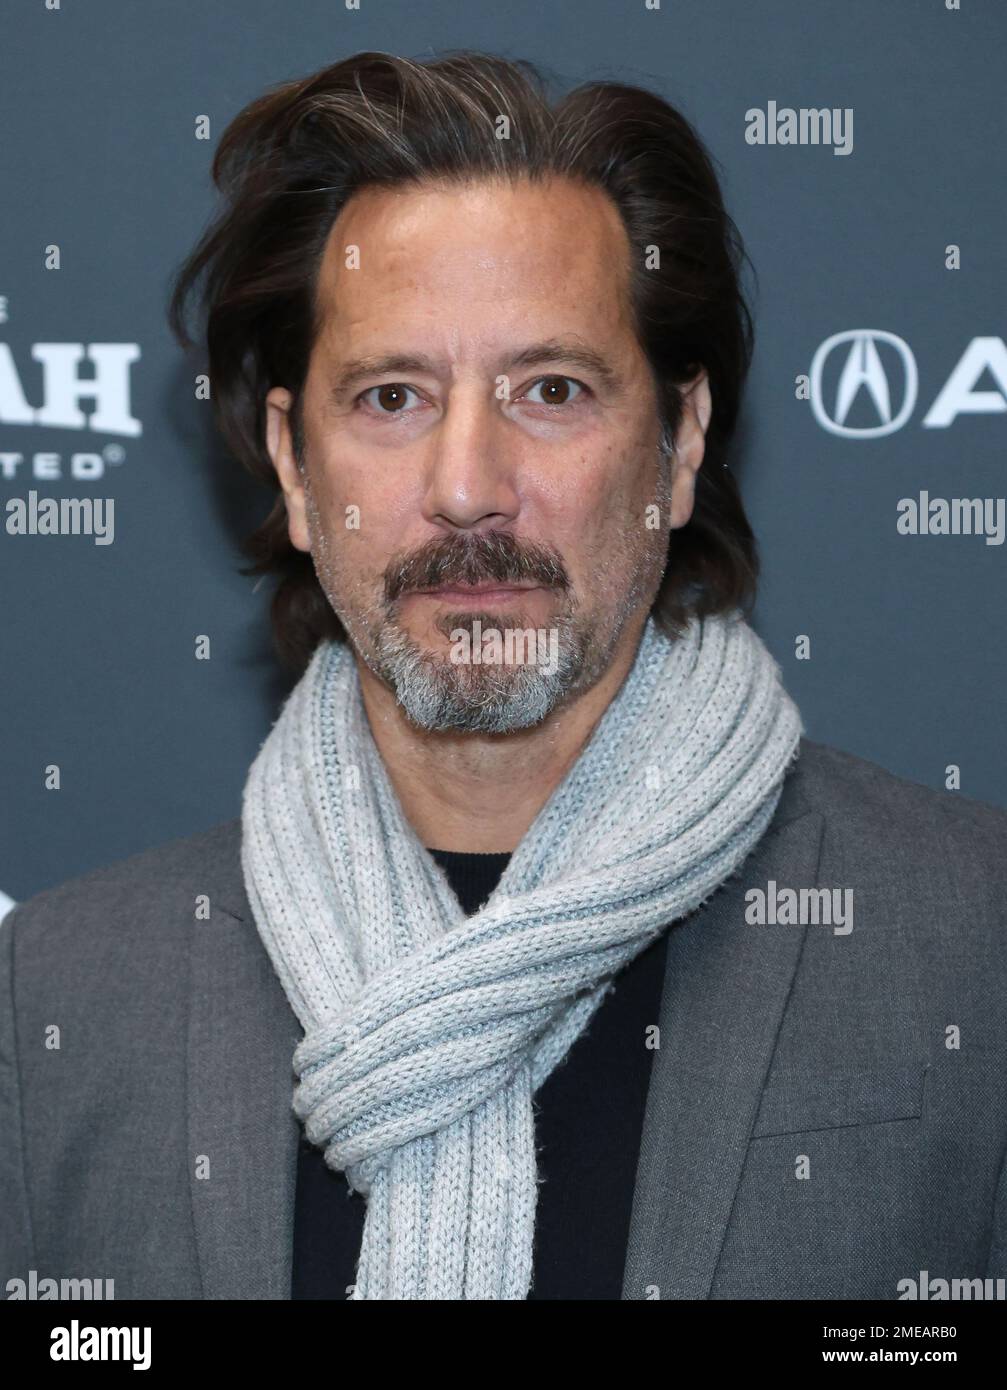 Henry Ian Cusick arriving to the “Jamojayo” premiere during the 2023 Sundance Film Festival held at the Eccles Center Theatre on January 22, 2023 in Park City, Utah. © JPA / AFF-USA.com Stock Photo